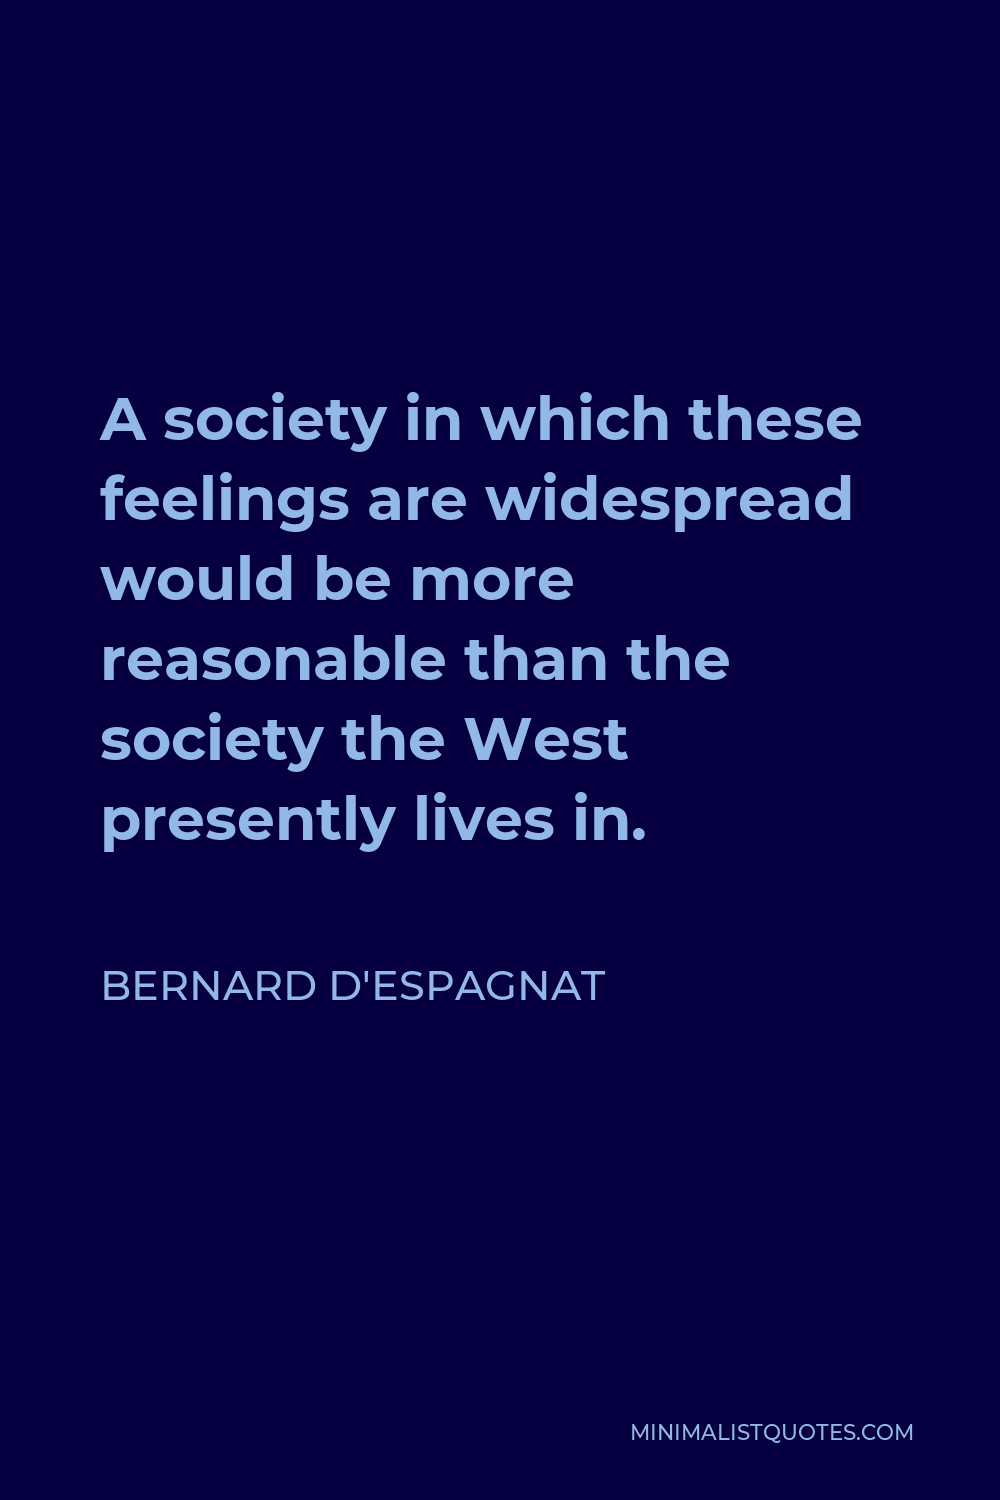 Bernard d'Espagnat Quote - A society in which these feelings are widespread would be more reasonable than the society the West presently lives in.